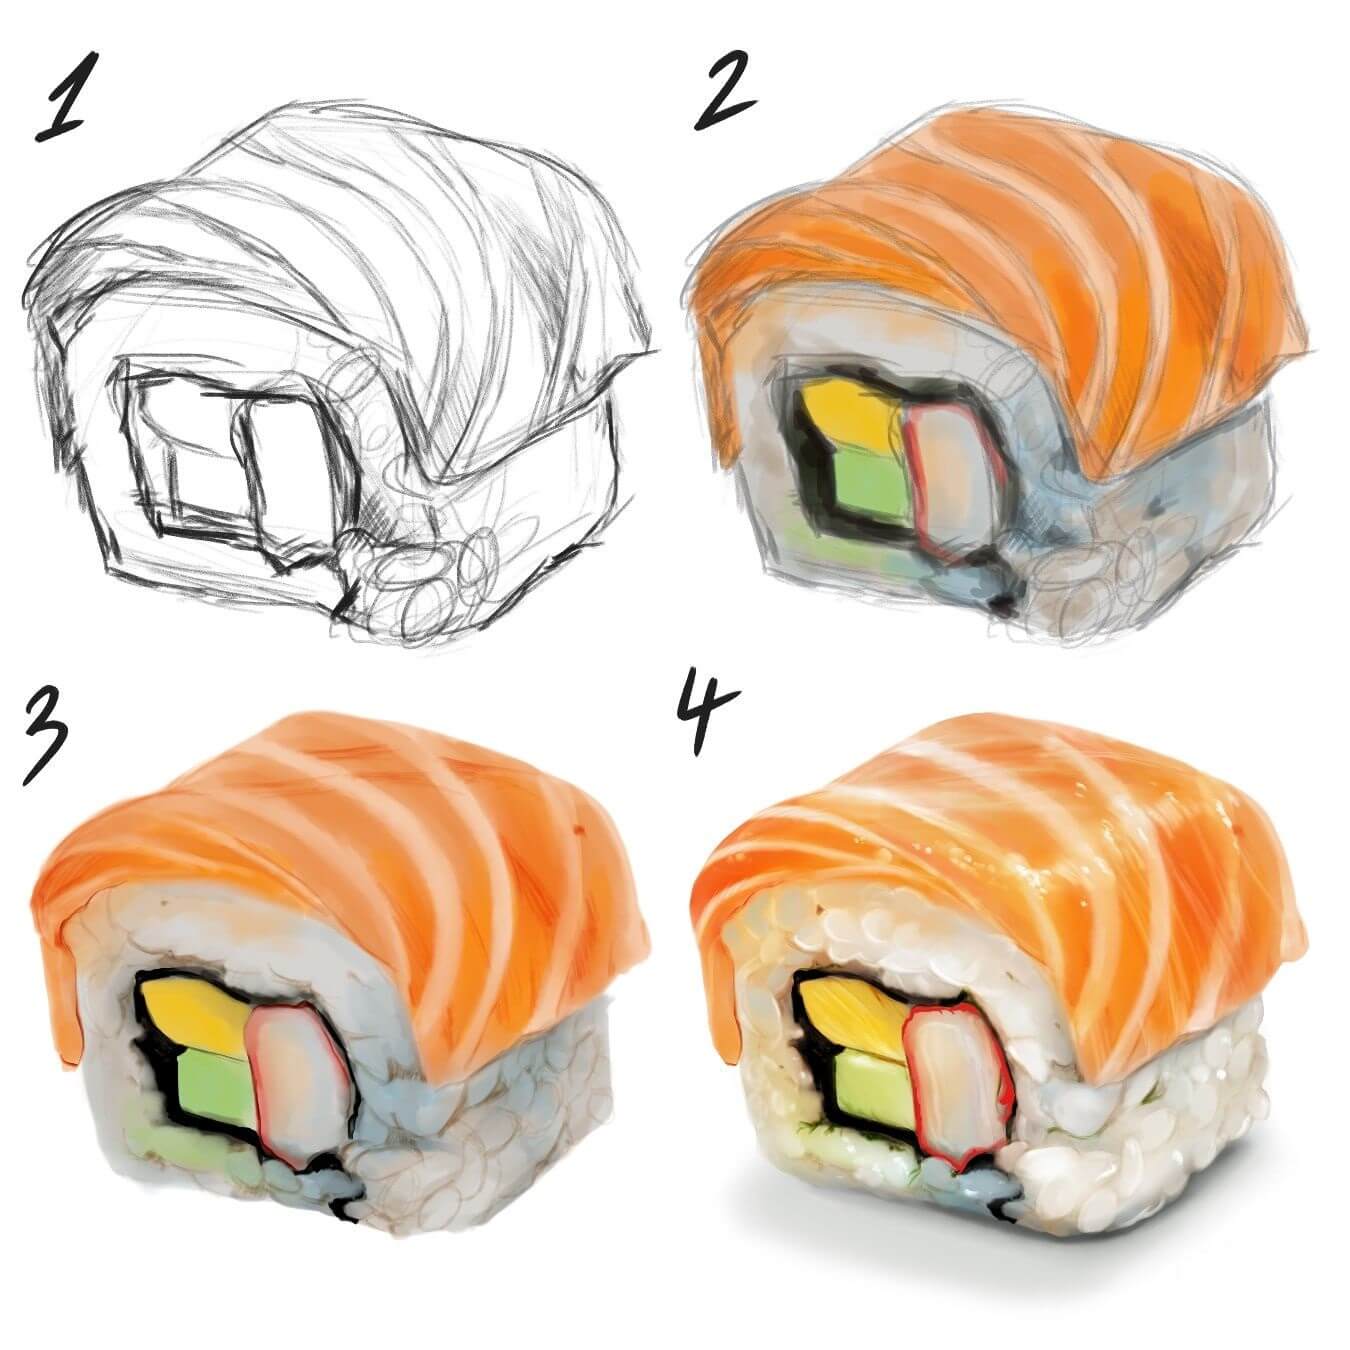 12 easy tutorials how to draw food How To Draw Tutorials